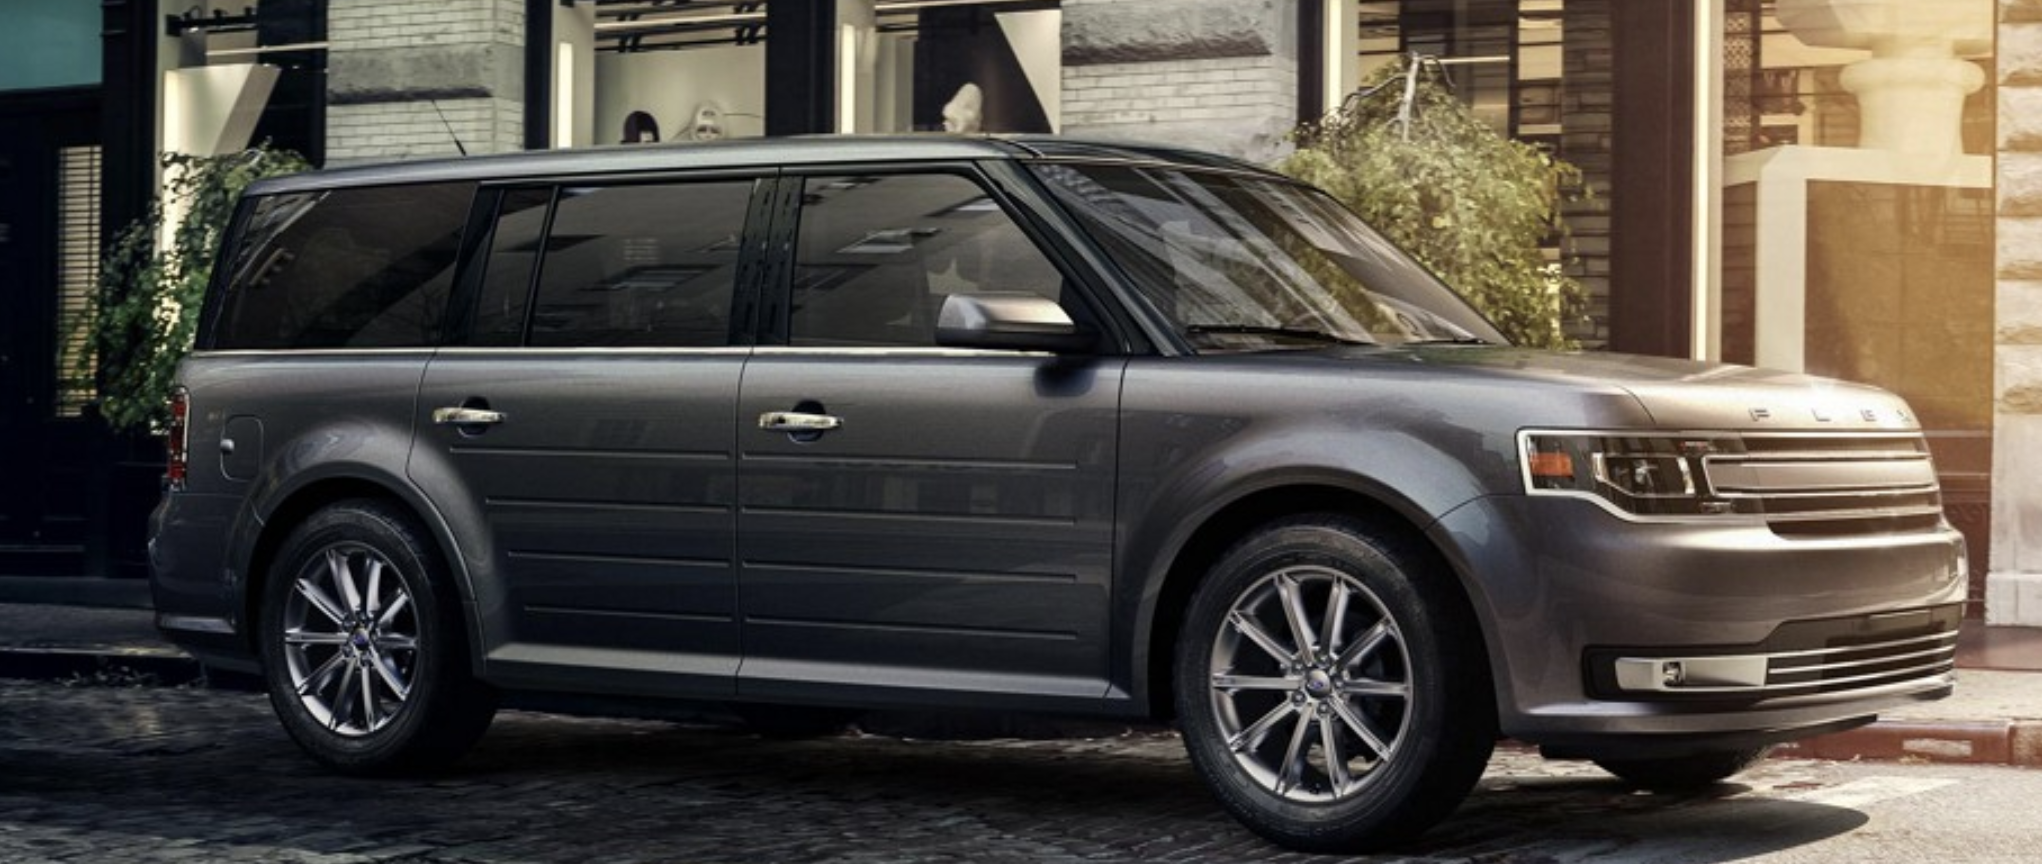 Flex in style with the 2018 Ford Flex | University Ford Durham